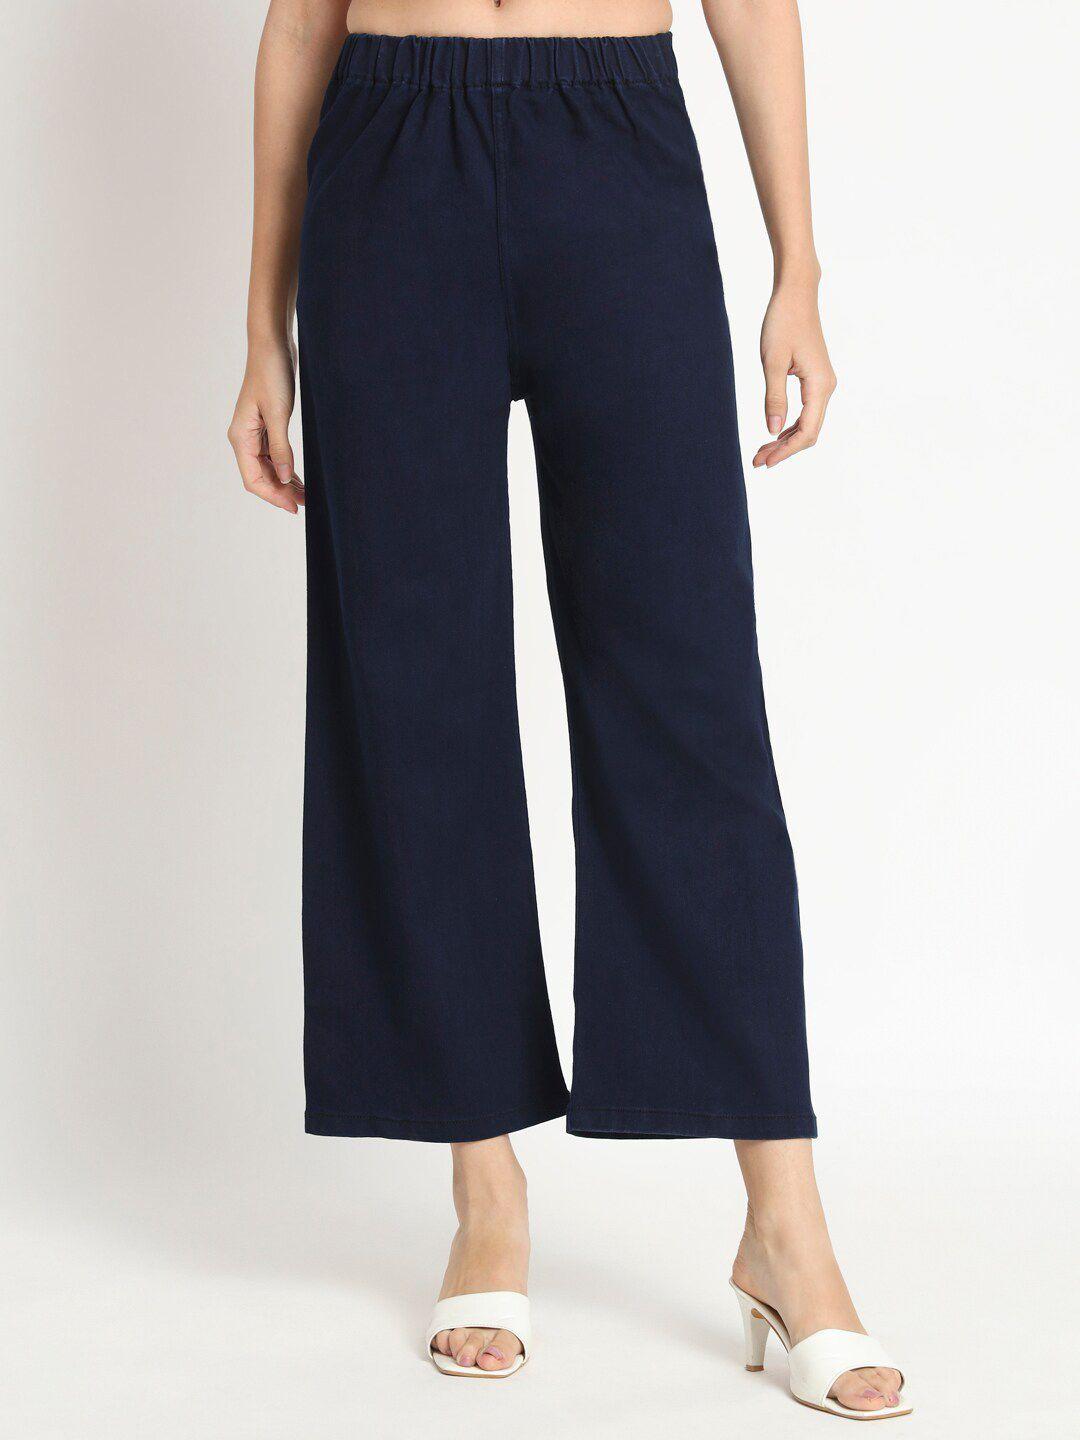 angelfab women mid-rise parallel trousers